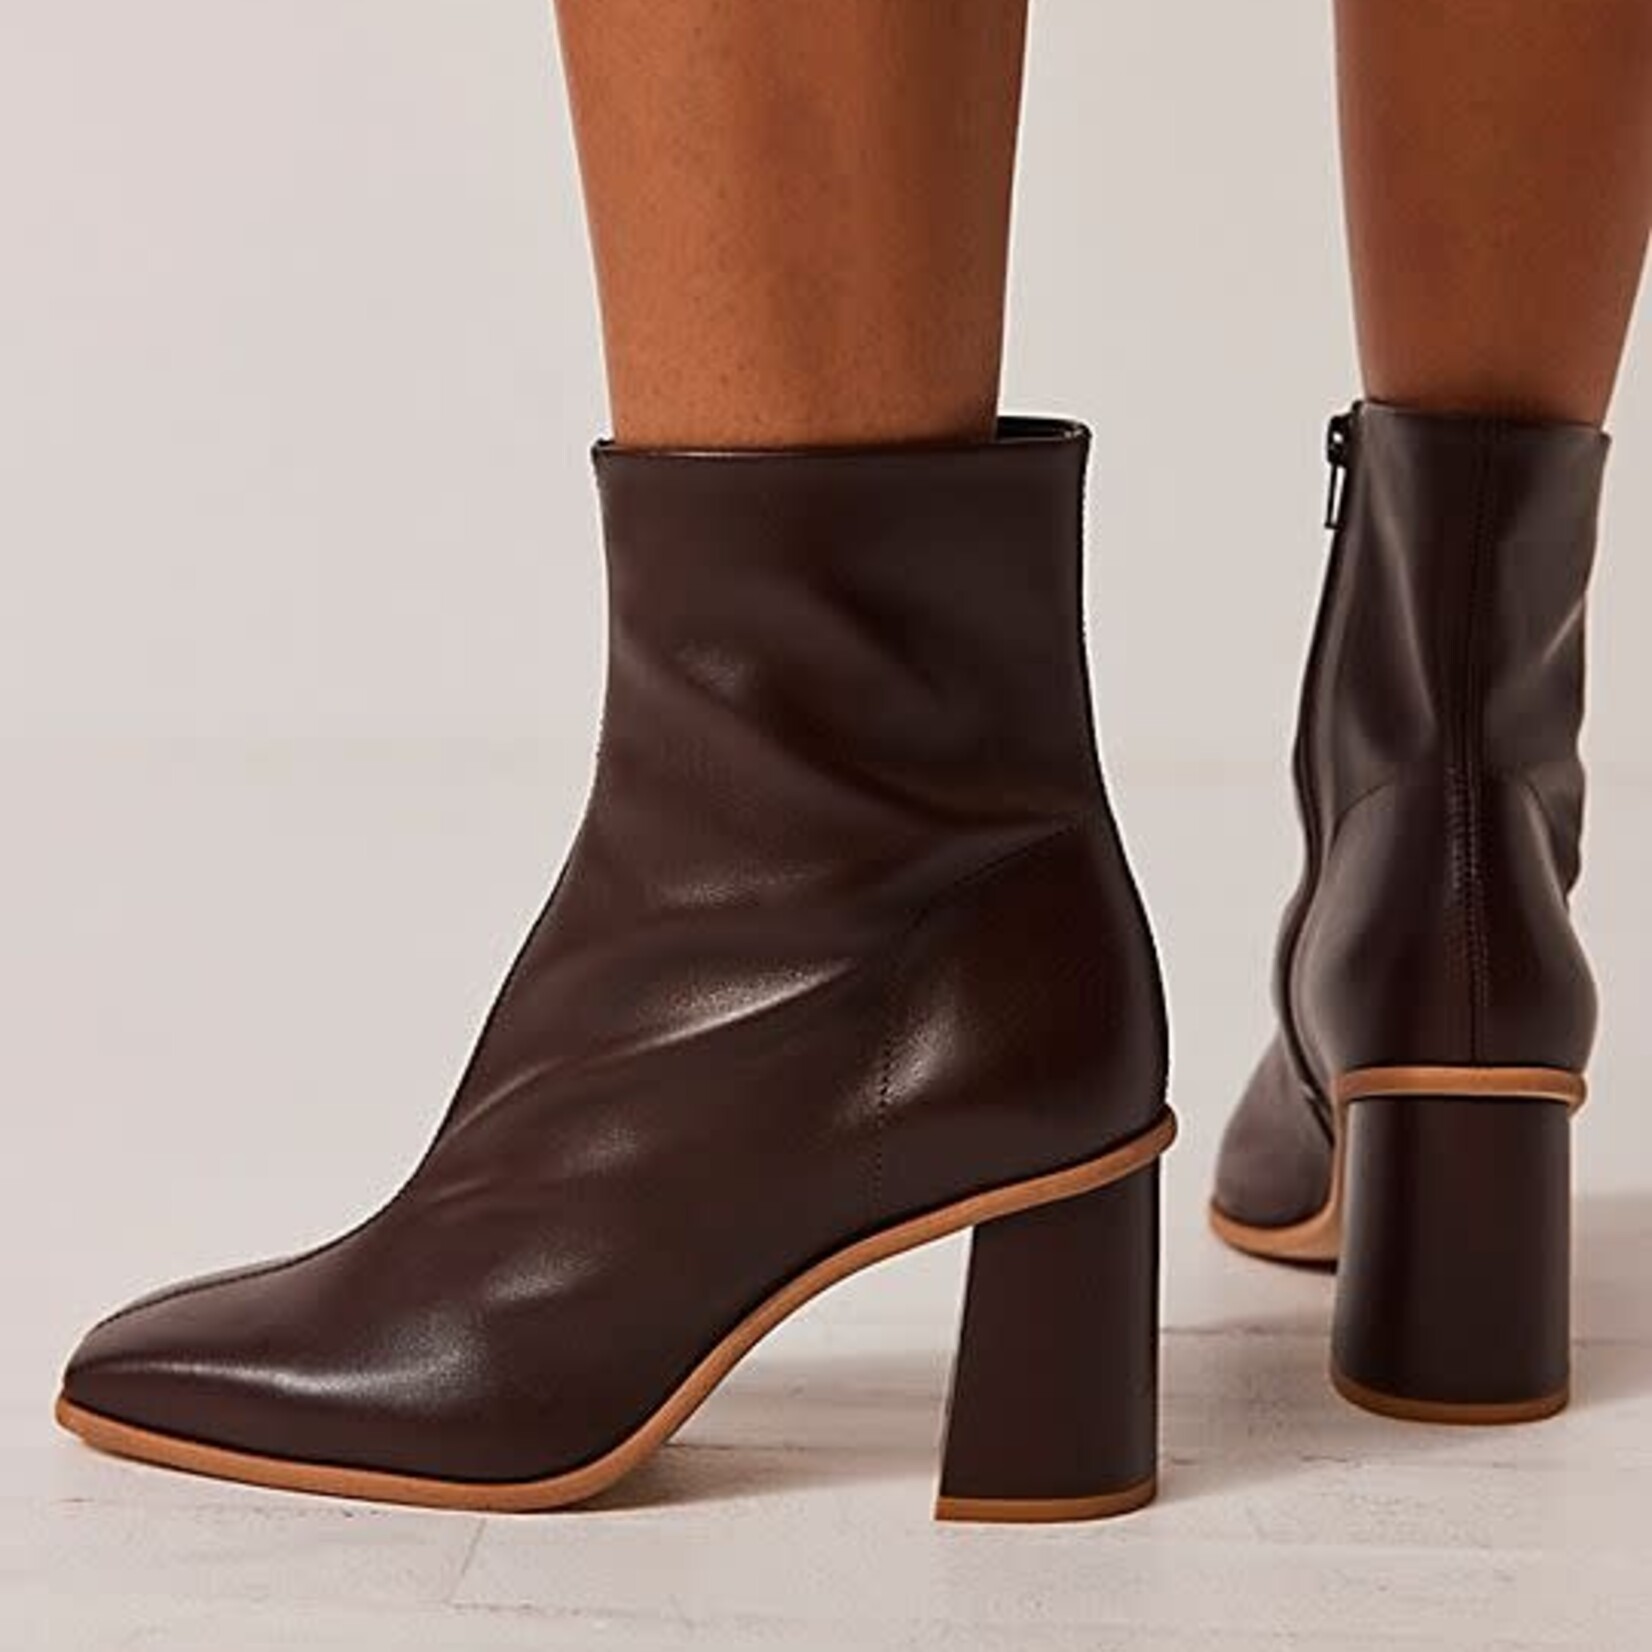 Free People Sienna Ankle Boot